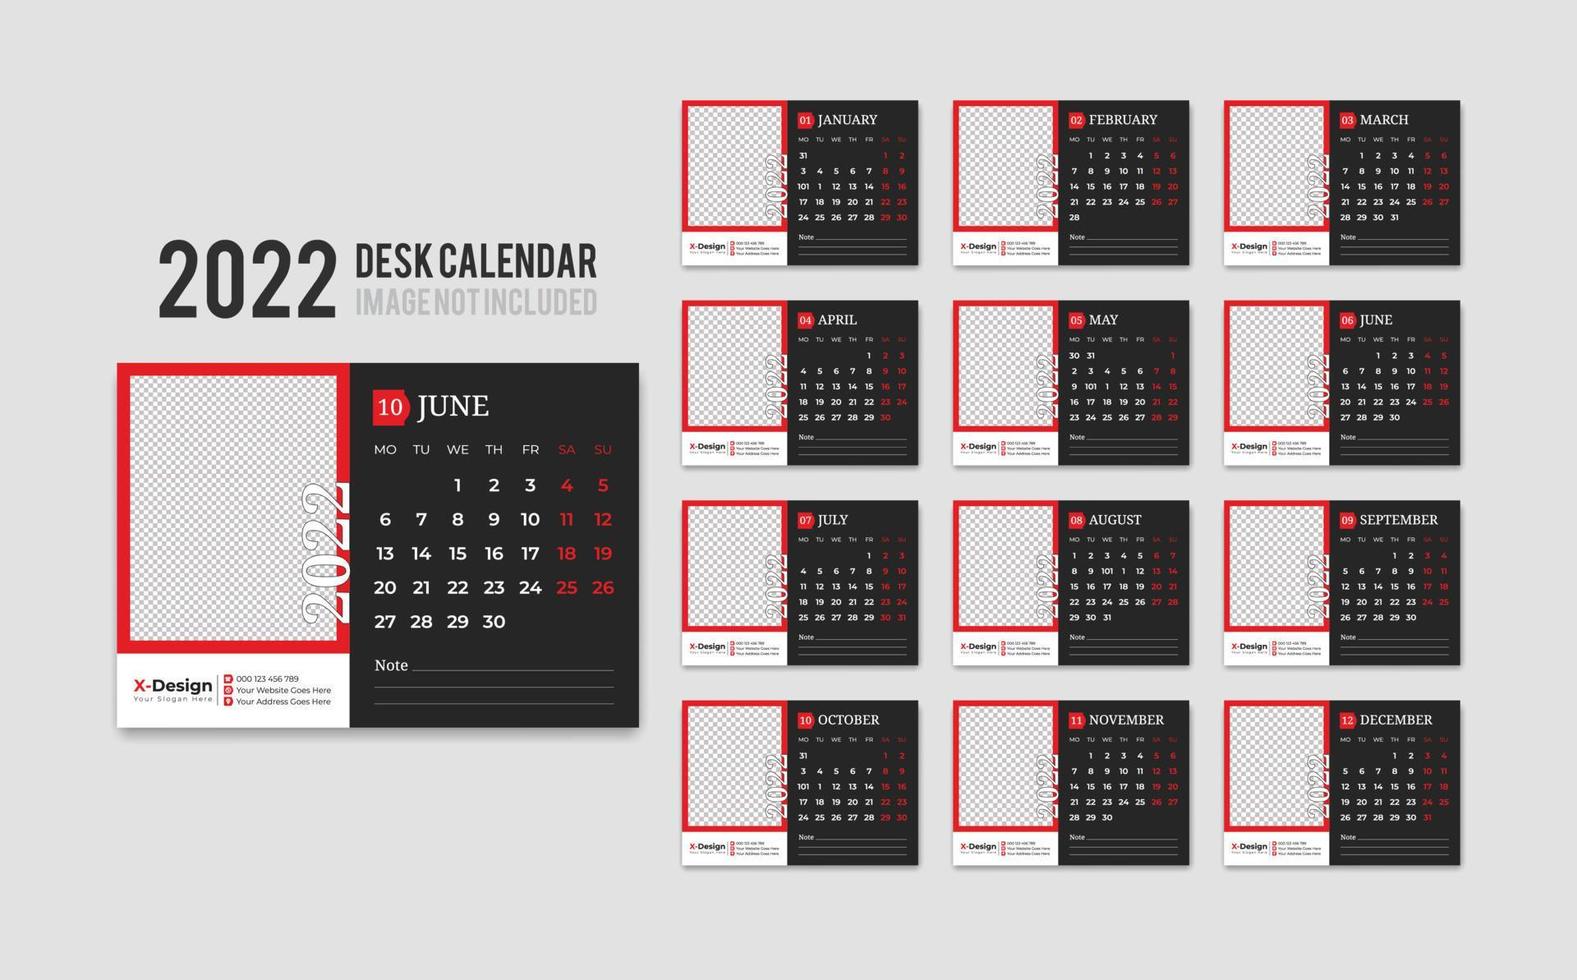 Print Ready Desk Calendar Template for 2022 Year, Desktop Monthly Office Calendar 2022 Week Starts on Monday, Yearly Planner vector